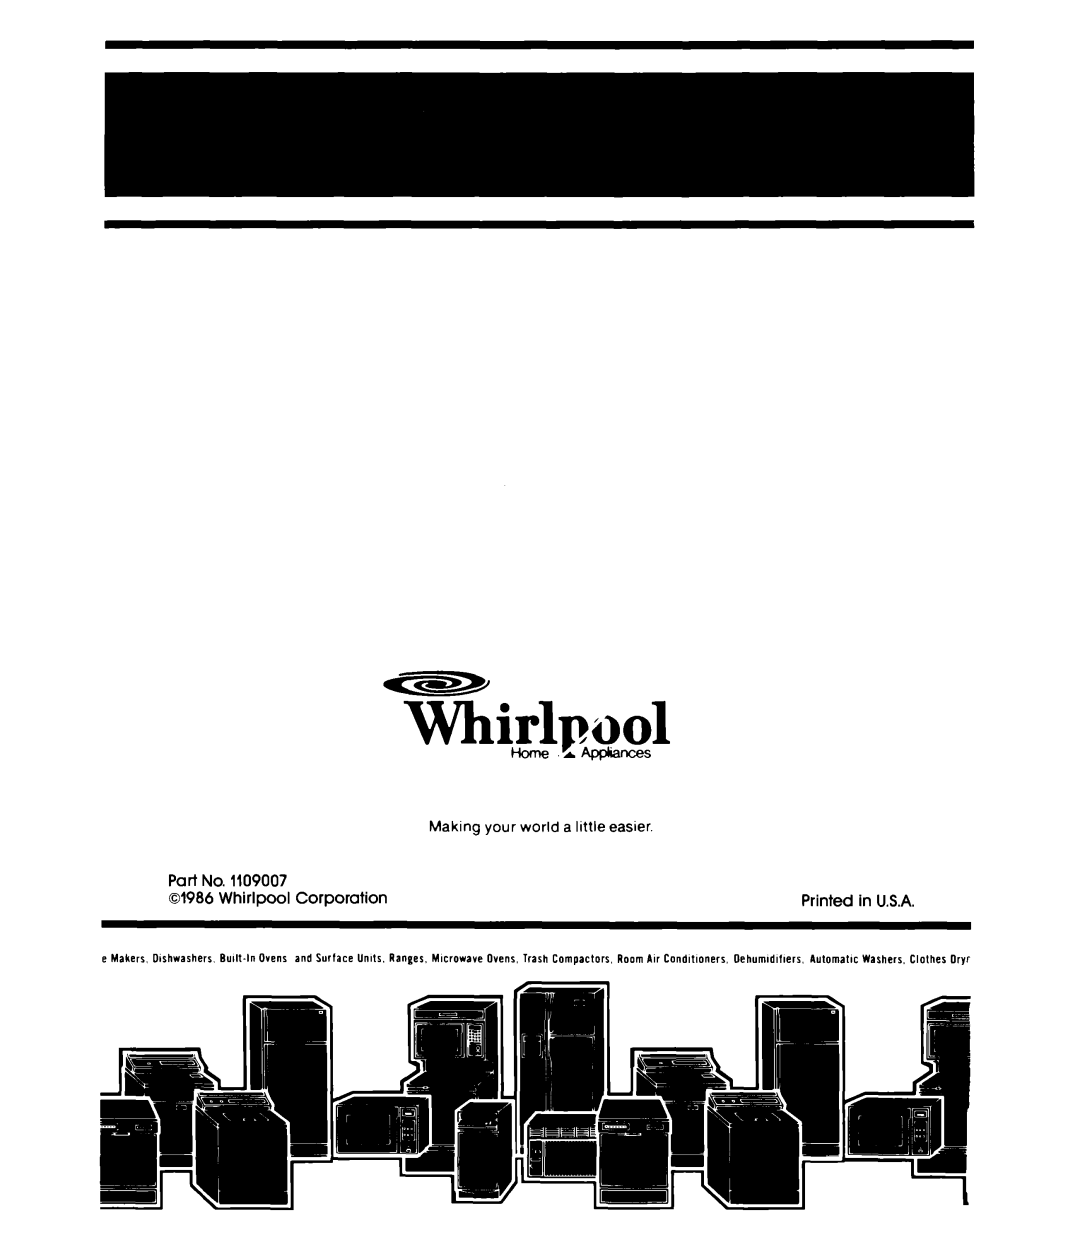 Whirlpool EDl9VK manual 01986, Whirlpool, Corporation, Printed, in U.S.A, Whirlpol, Home.r’~rces 